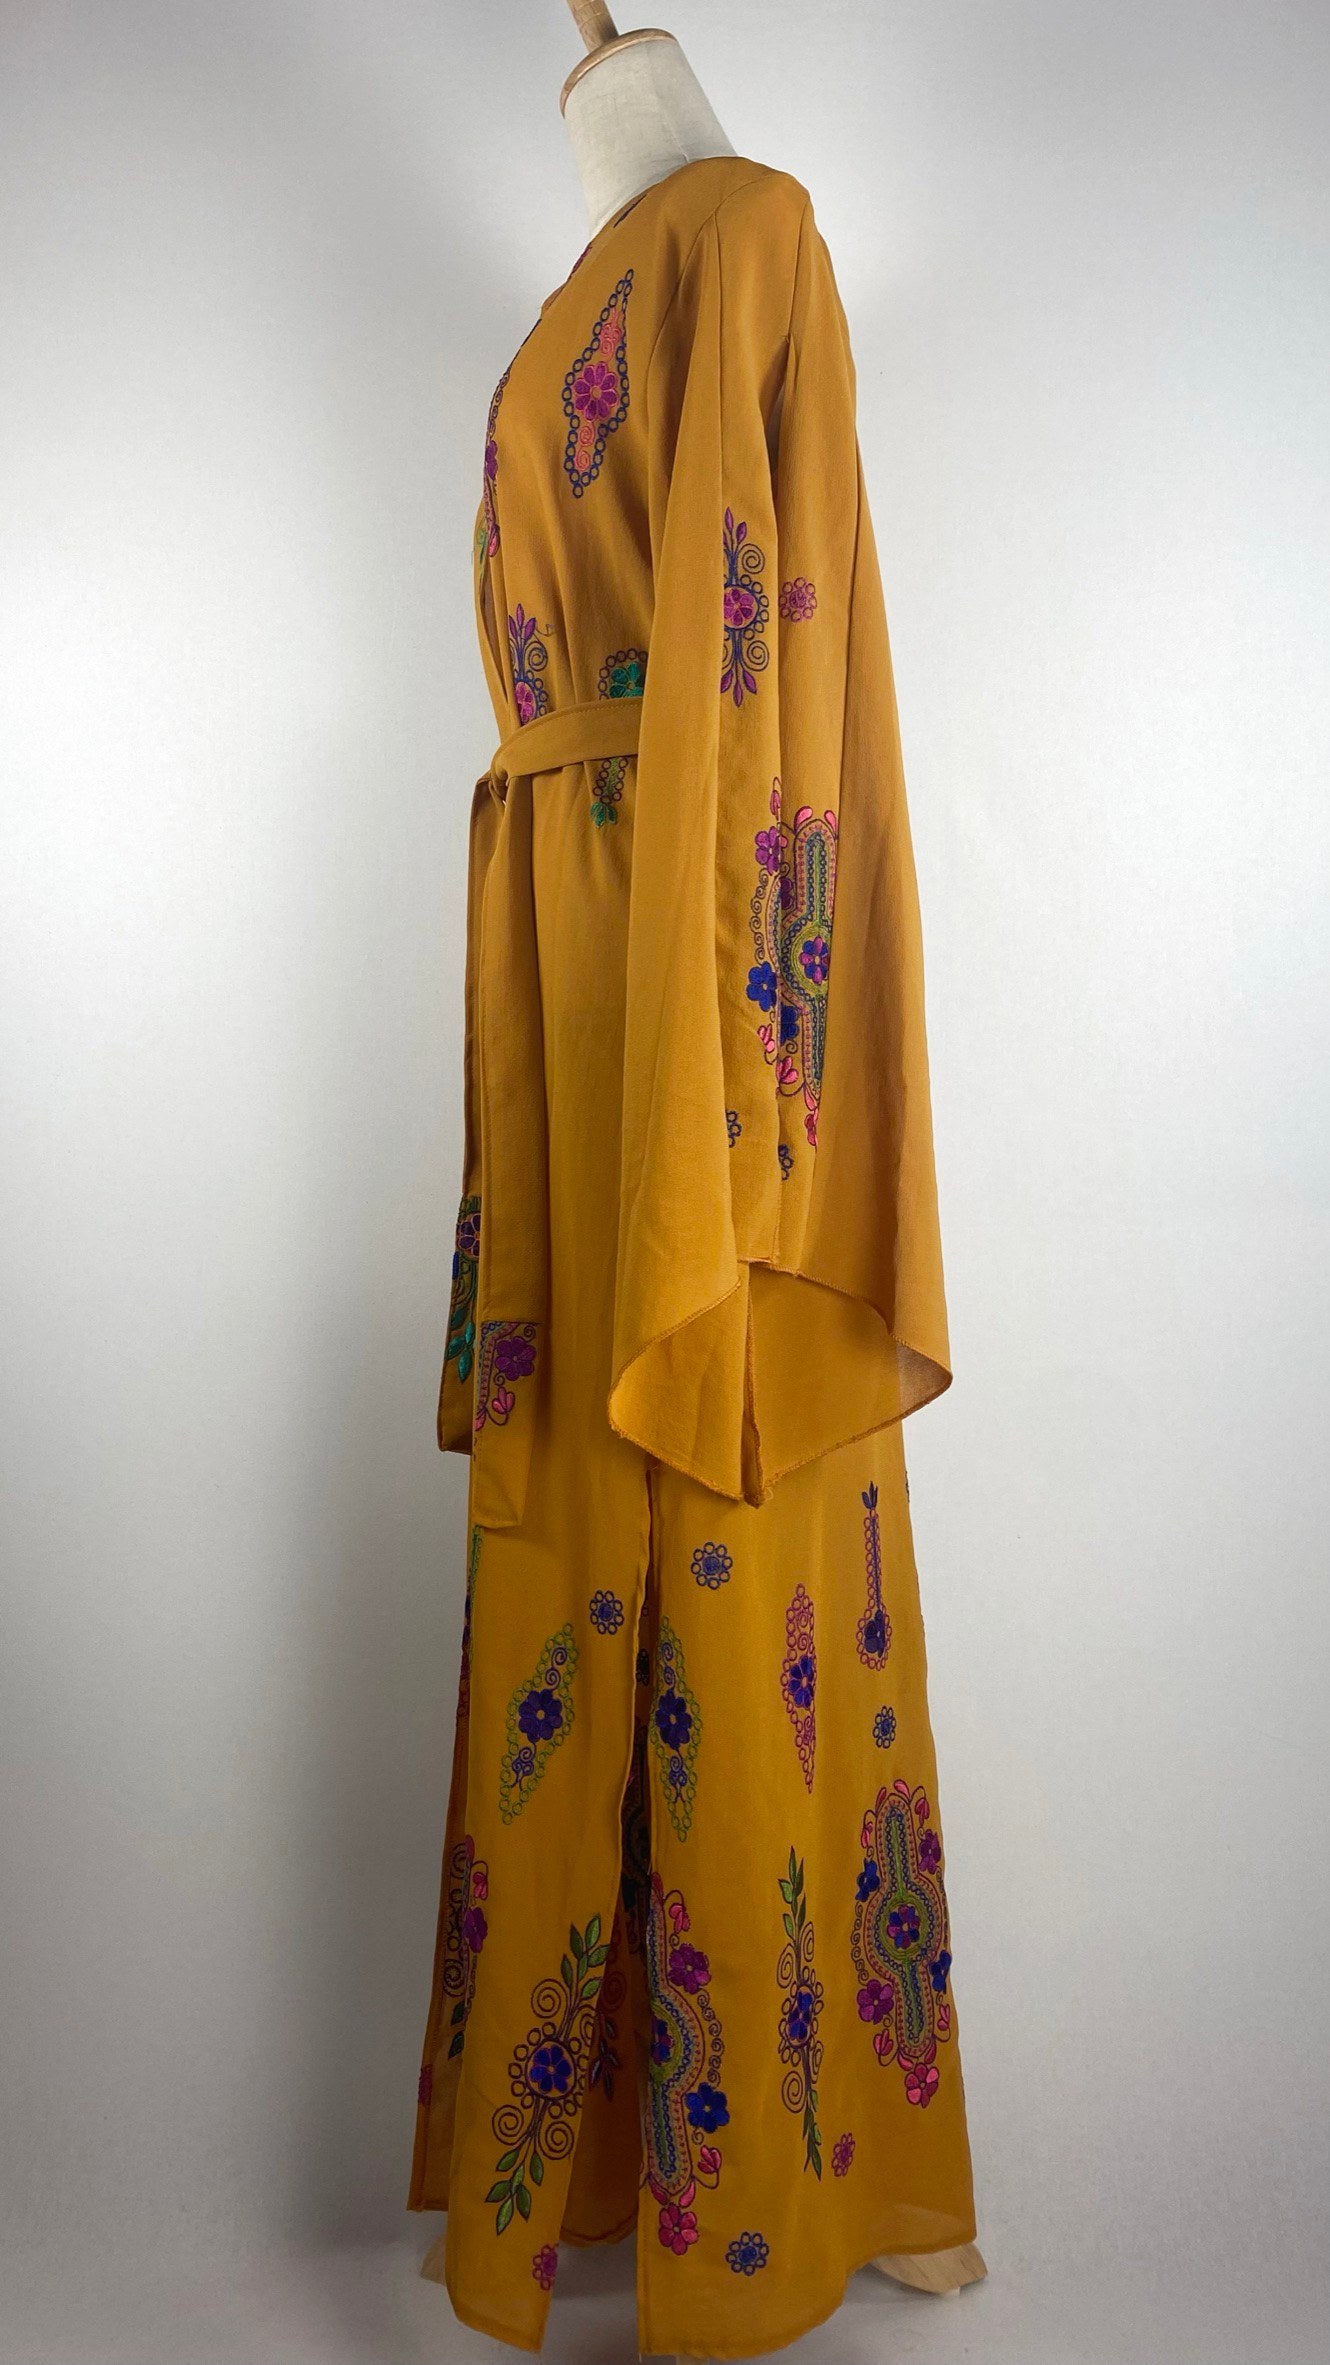 Long Sleeve Open Maxi Cardigan with Embroidery, Mustard